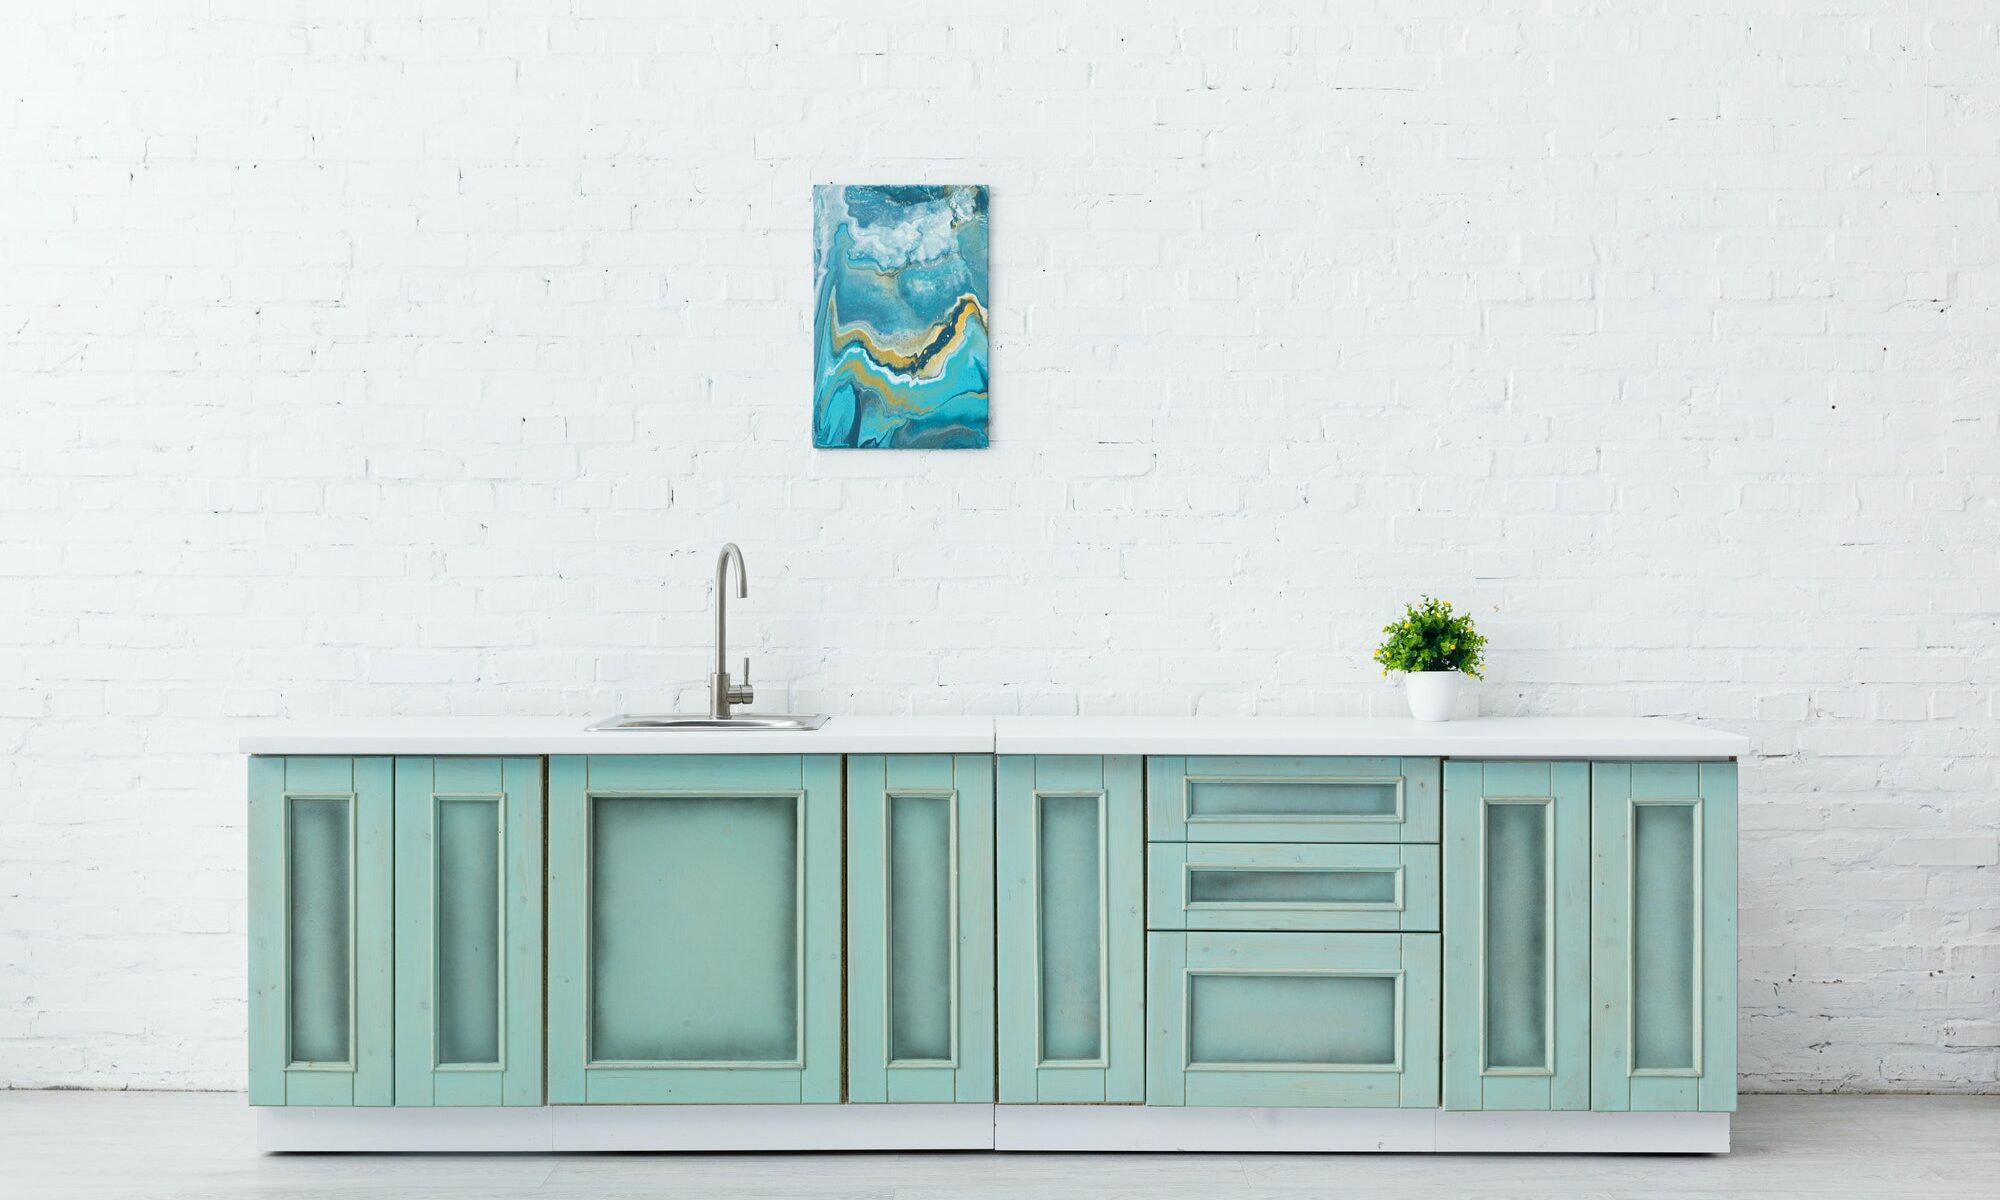 white and turquoise kitchen interior with sink, plant and abstract painting on brick wall